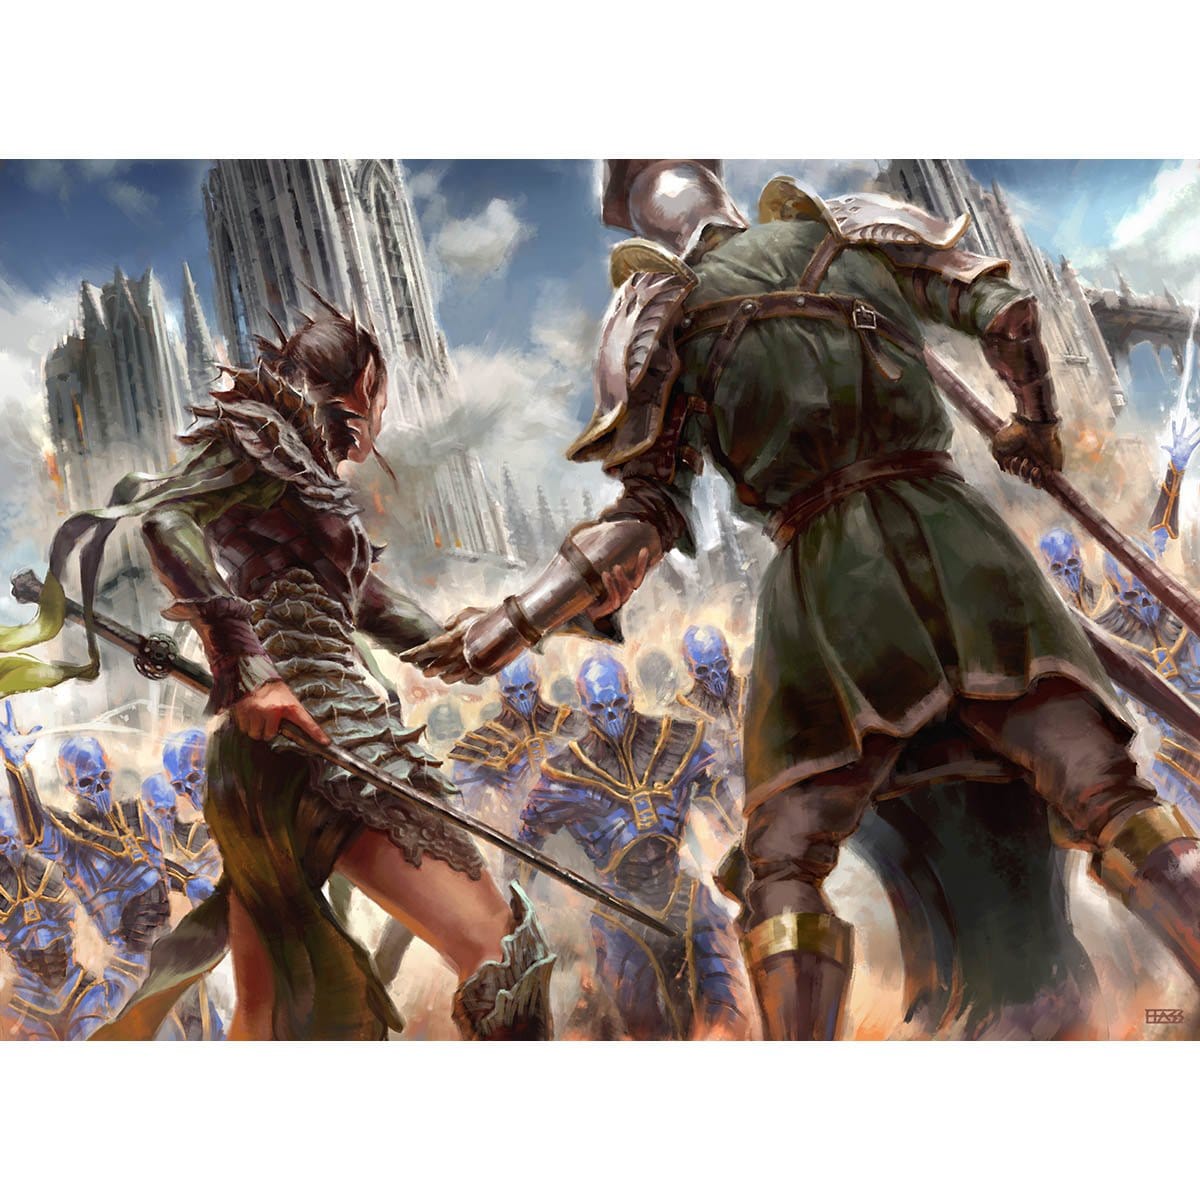 Band Together Print - Print - Original Magic Art - Accessories for Magic the Gathering and other card games